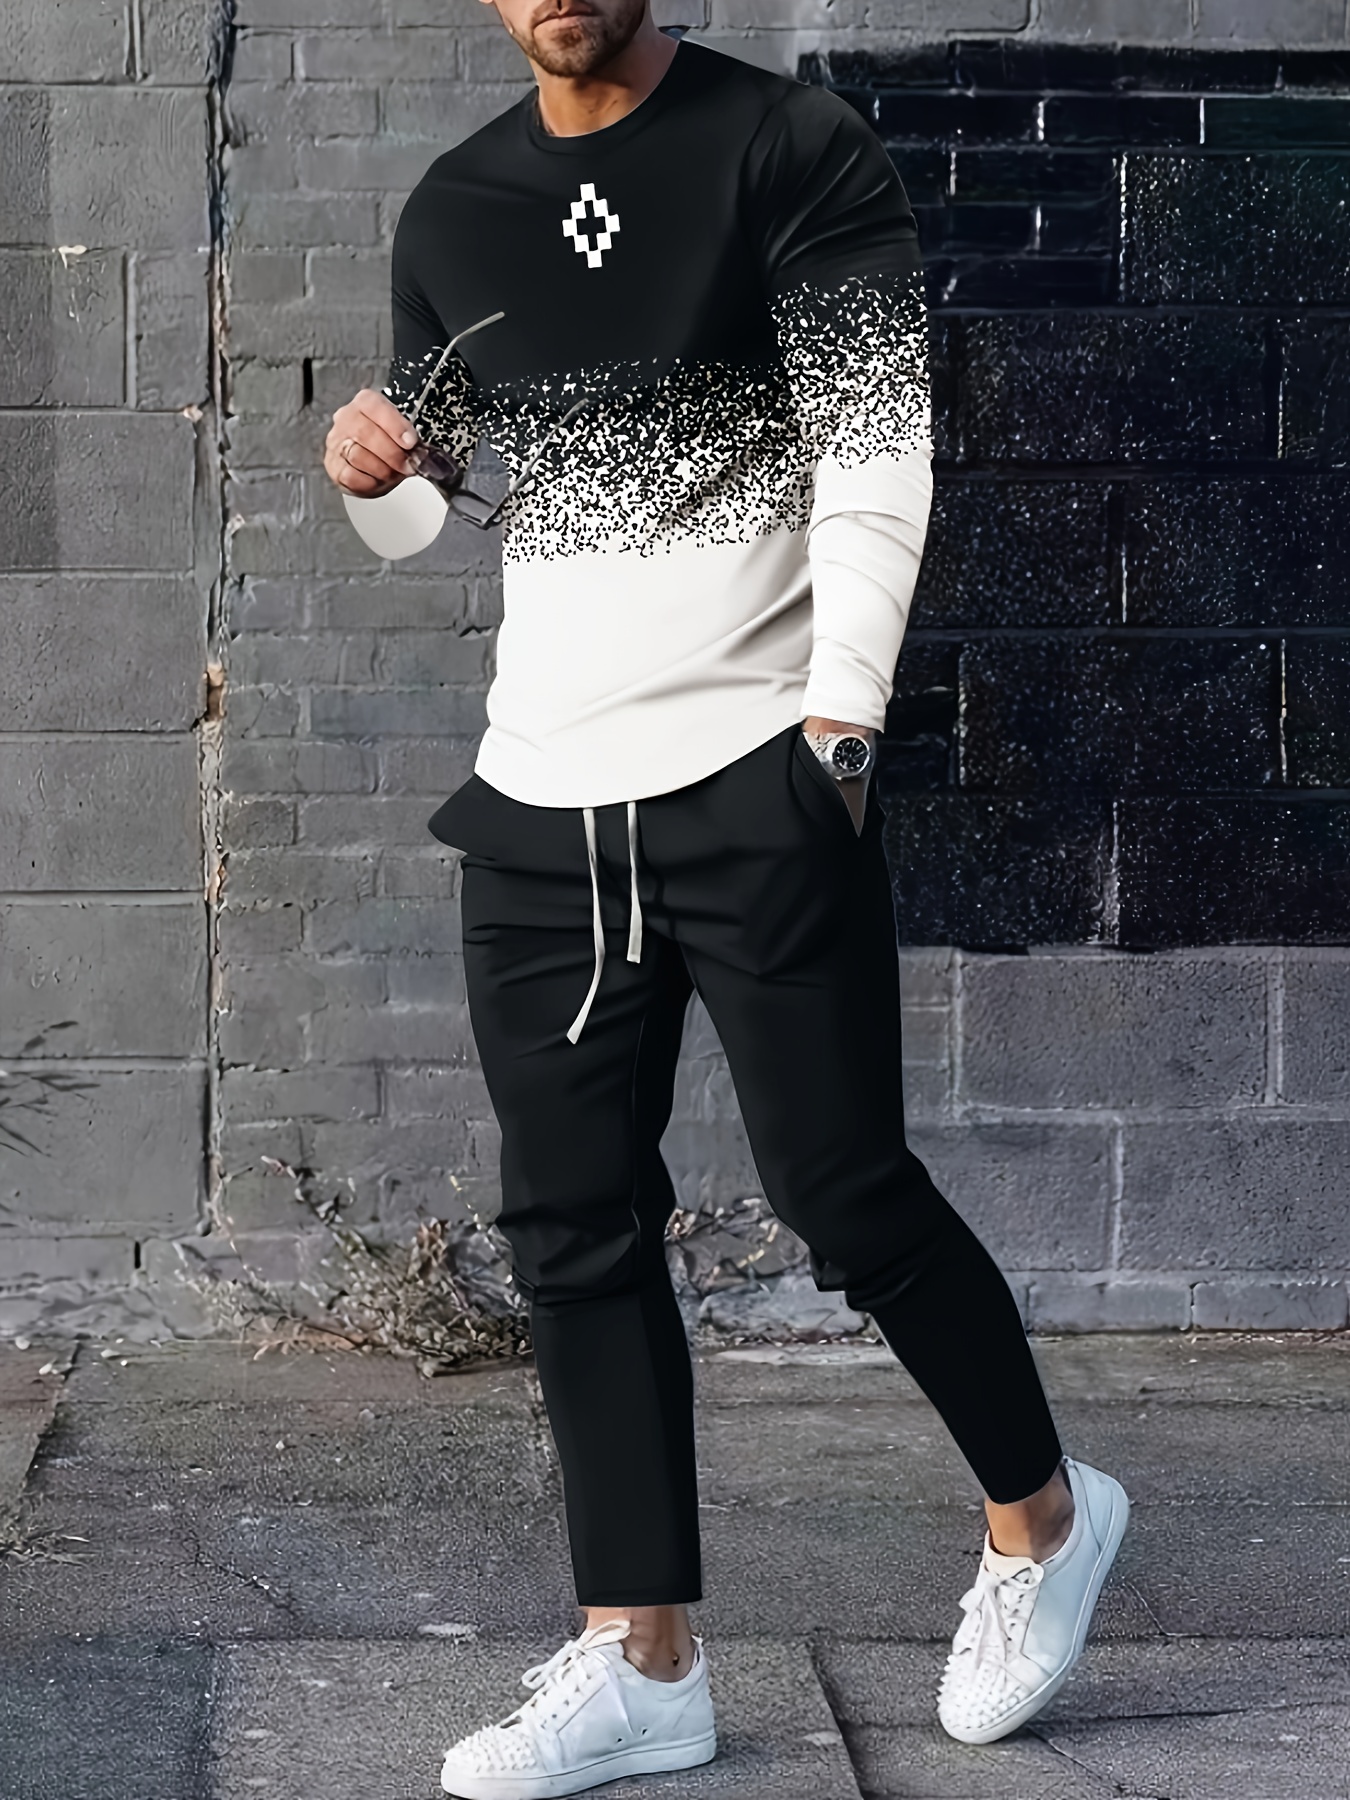 Black and White Sweatpants Outfits For Men (467 ideas & outfits